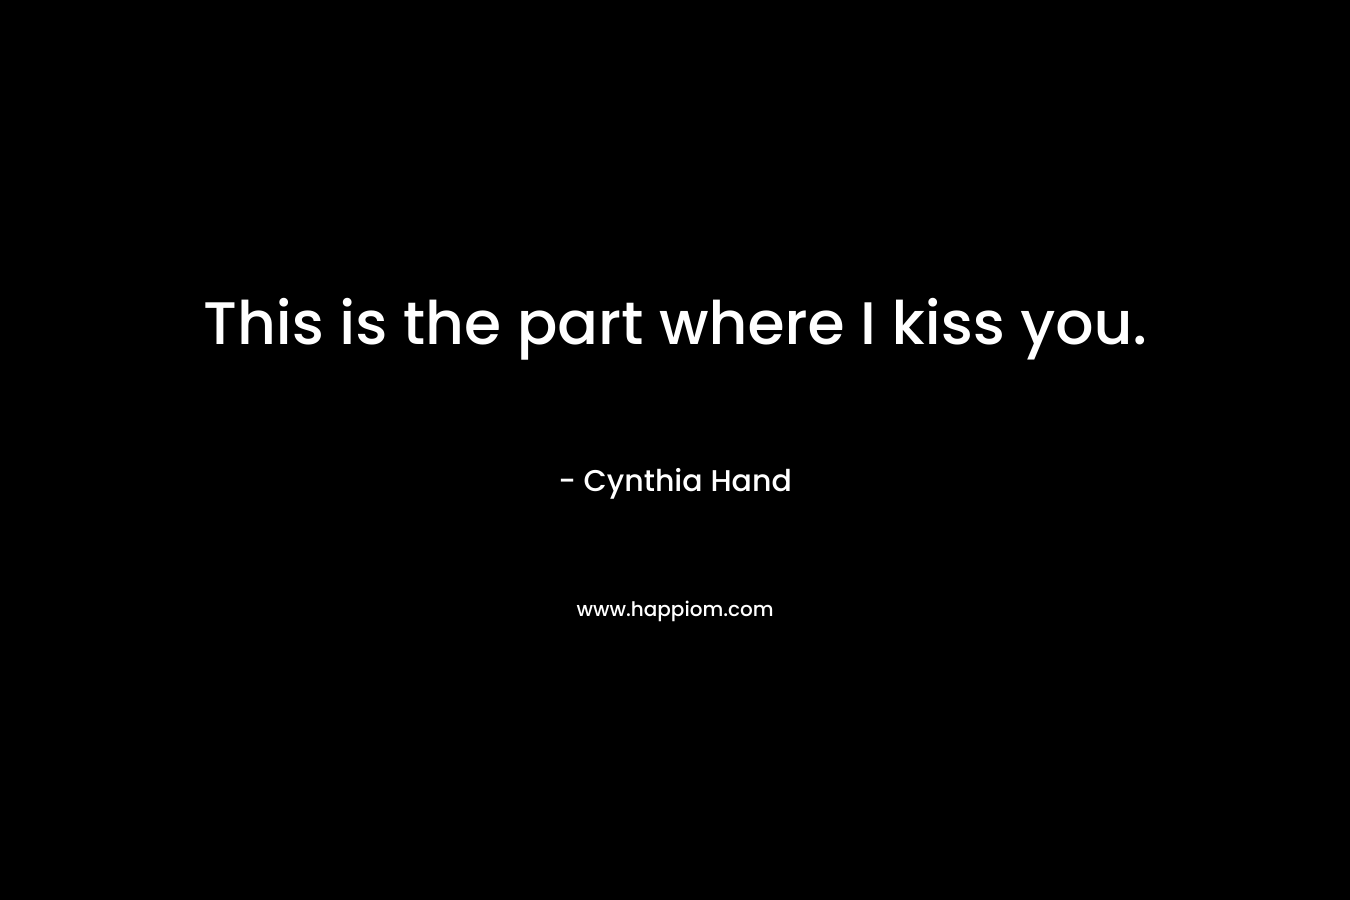 This is the part where I kiss you. – Cynthia Hand